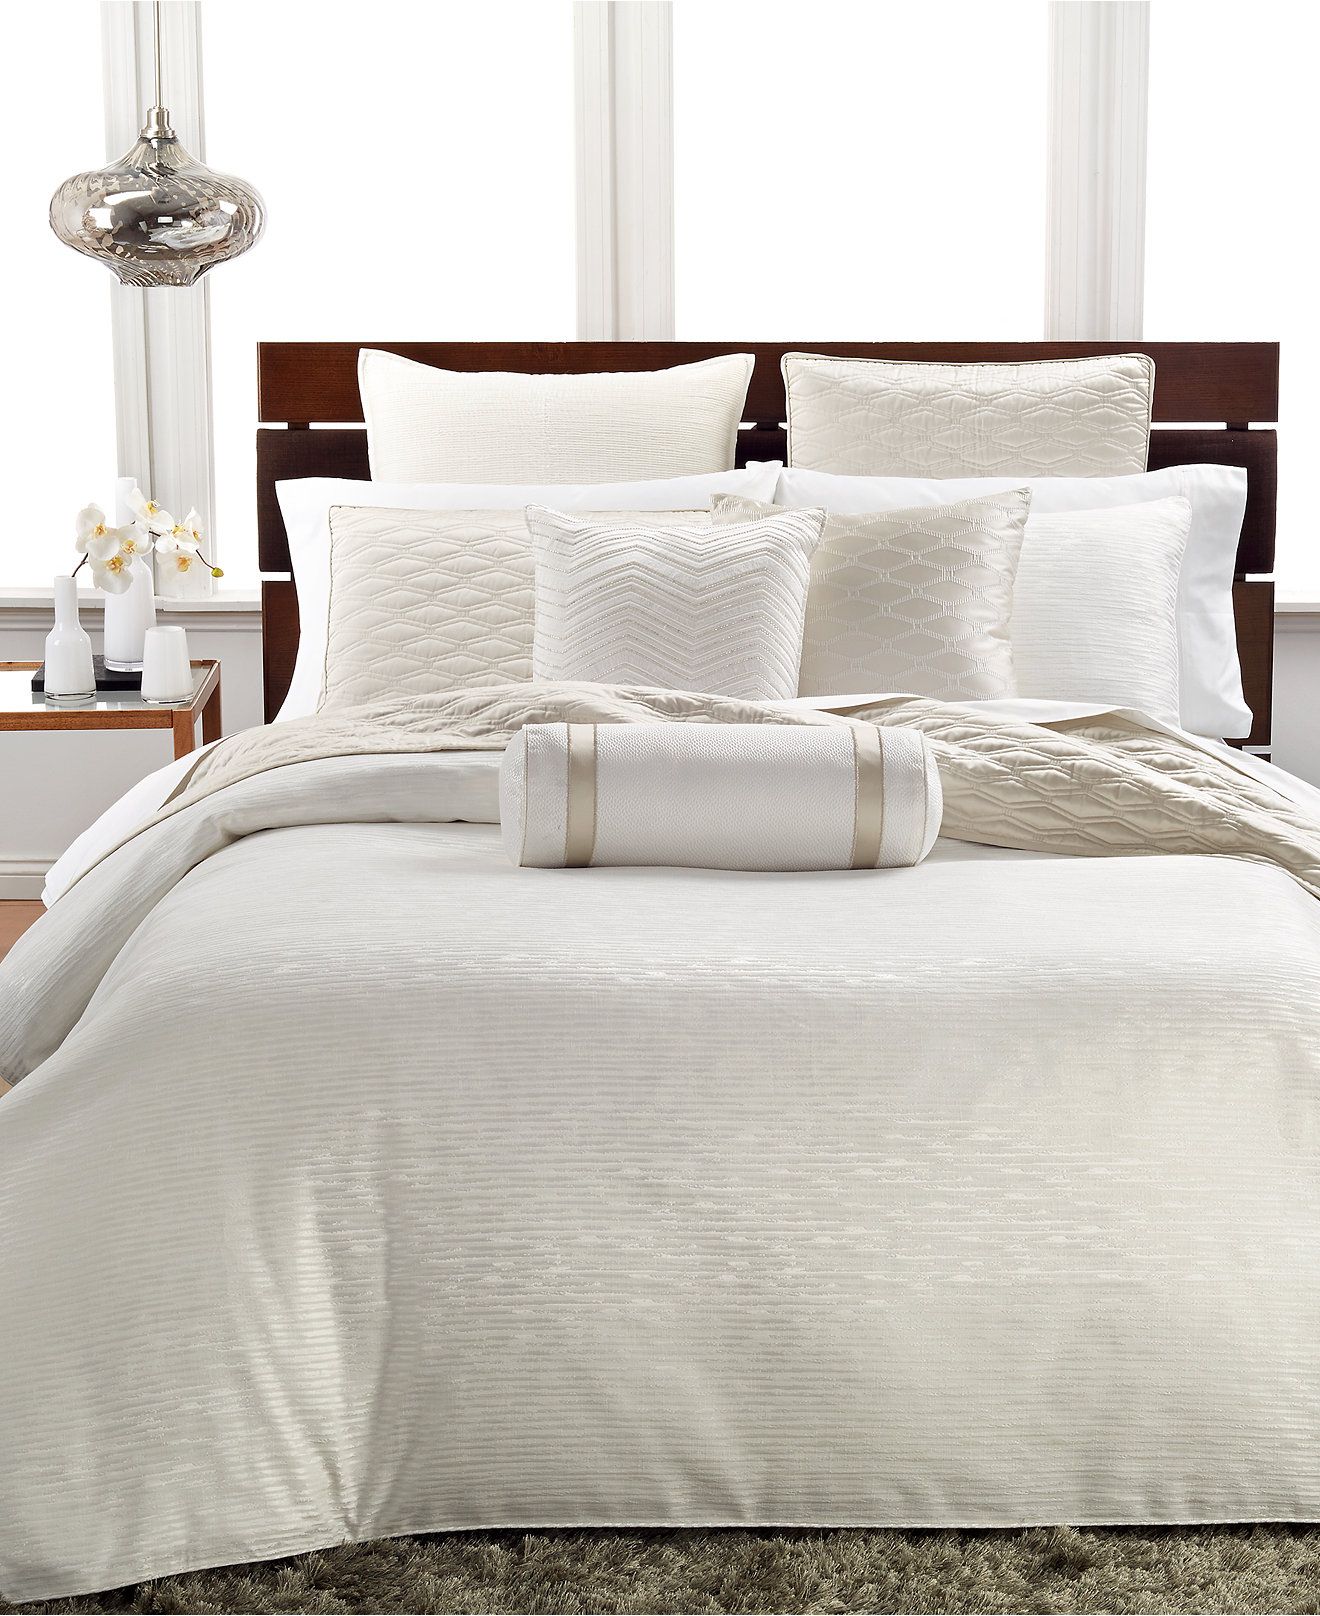 Go with the trendy collection of luxury duvet covers